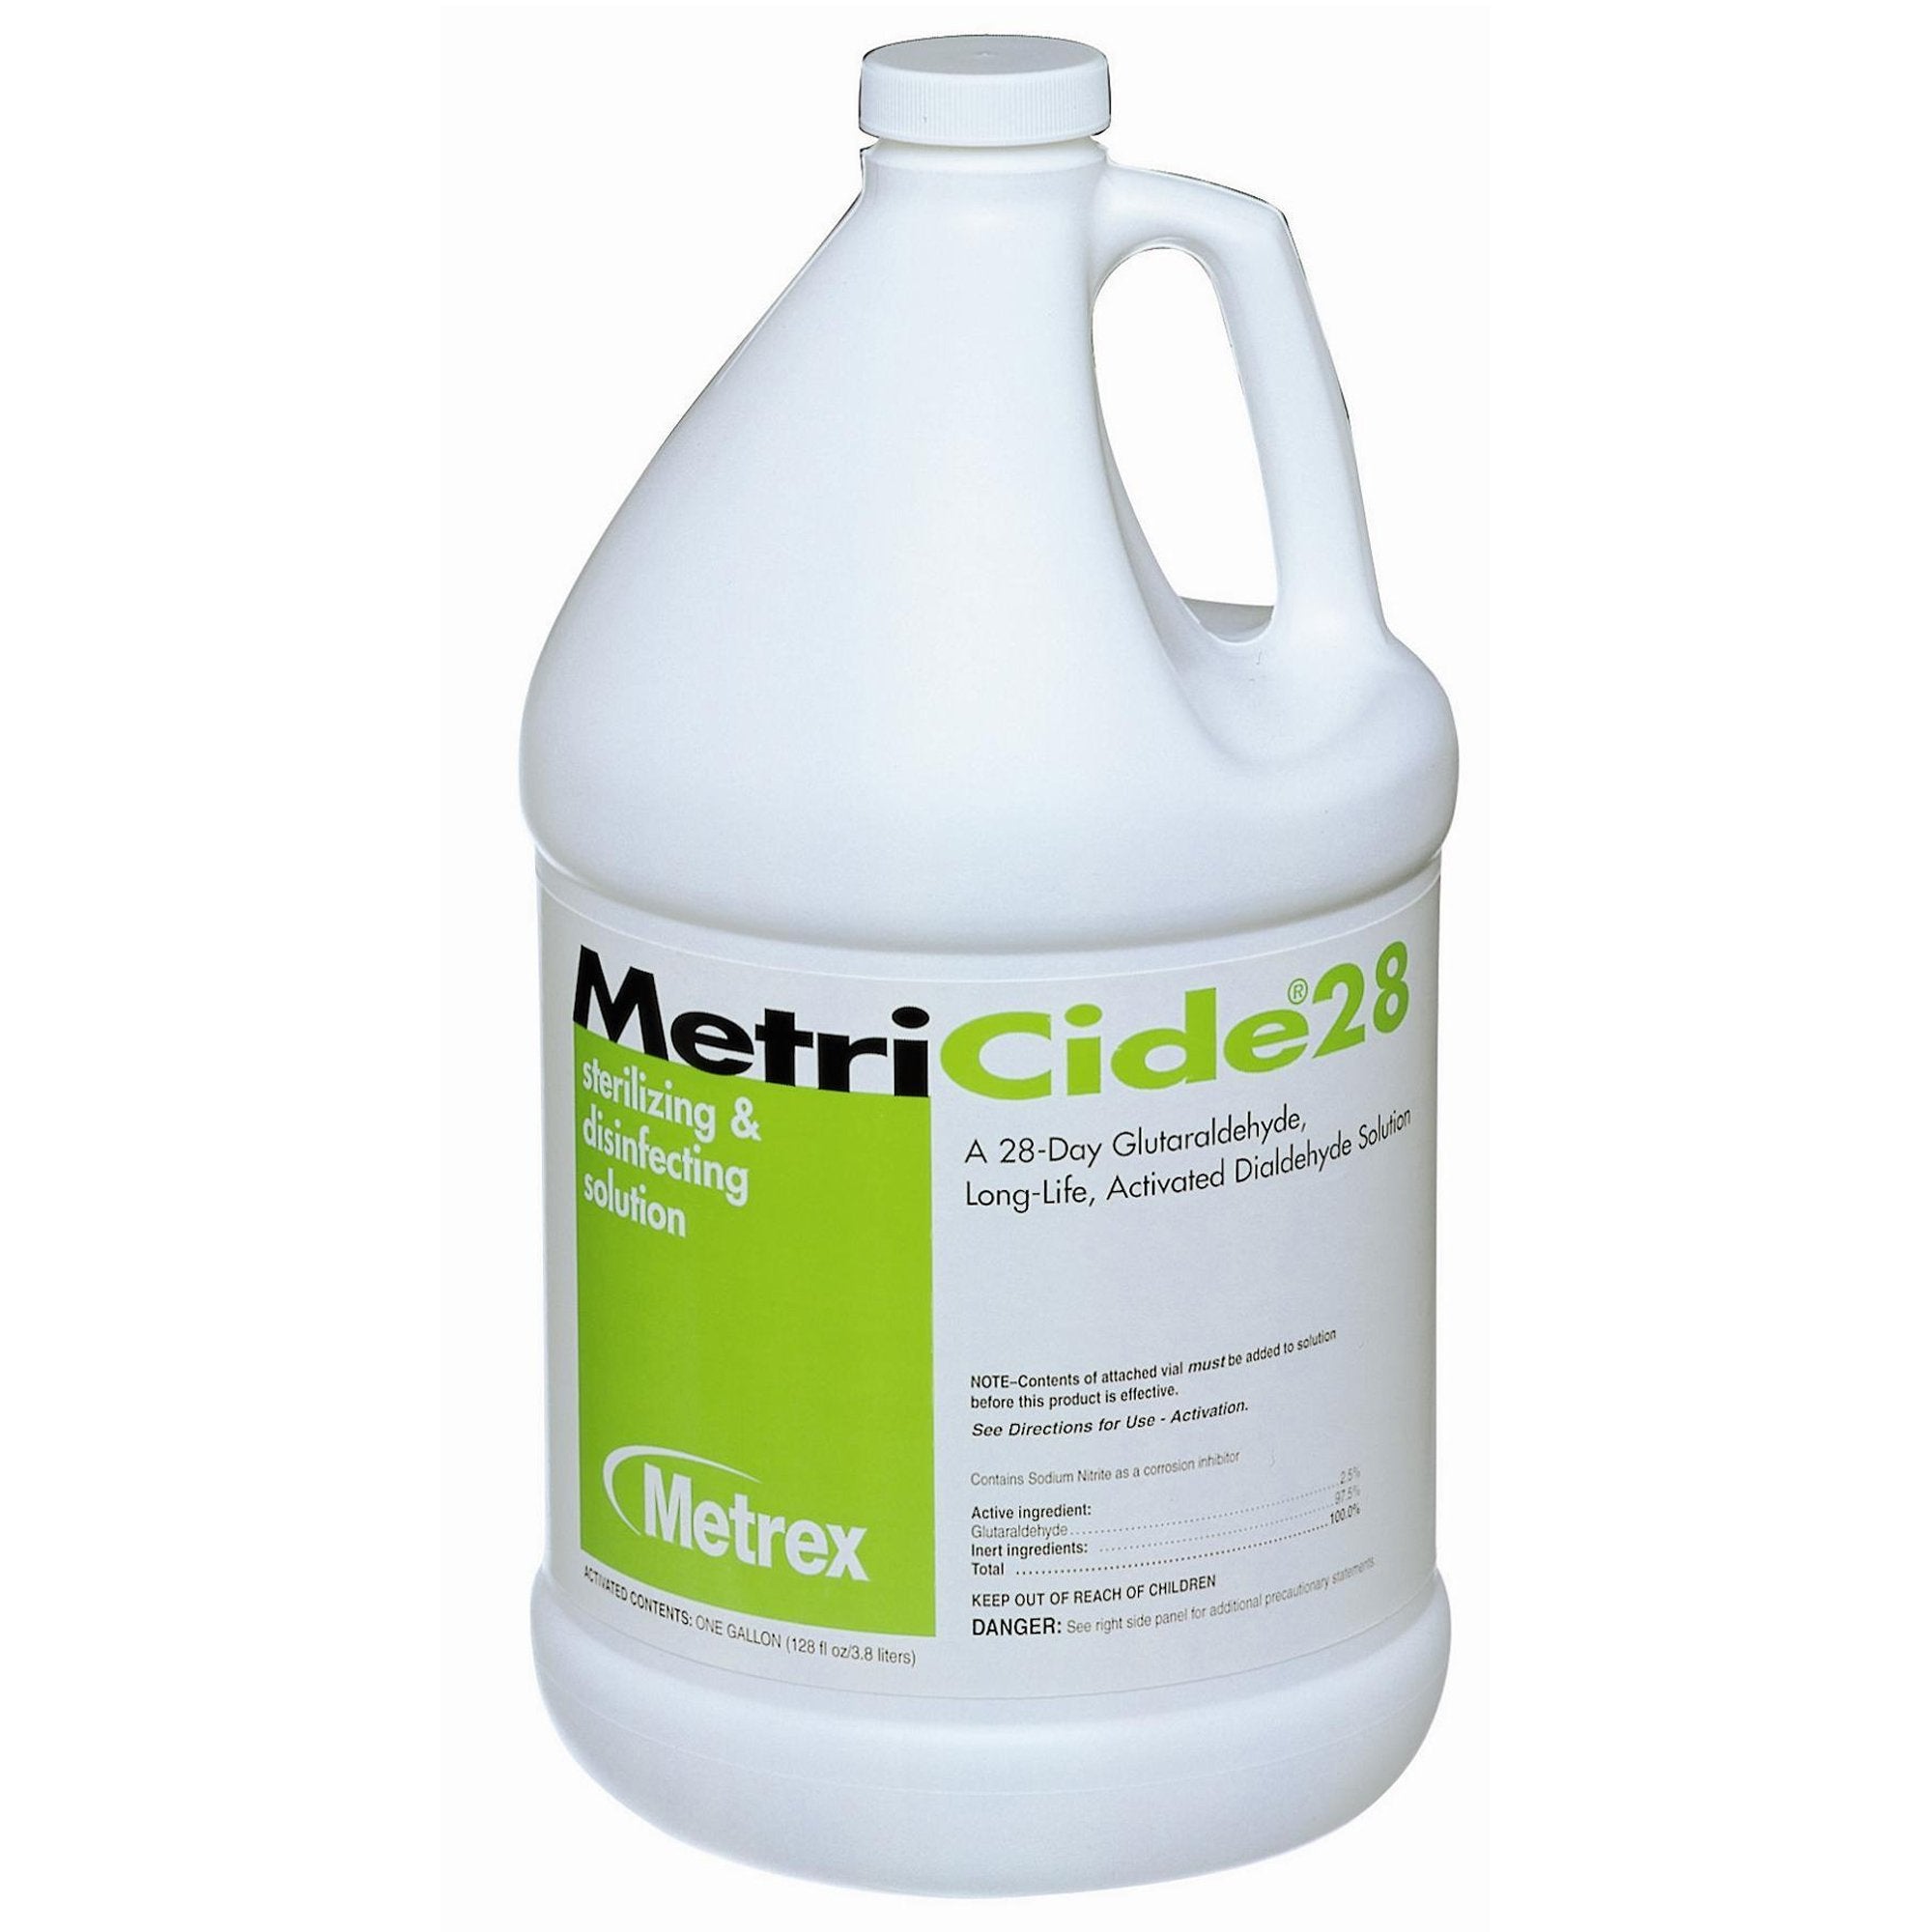 Glutaraldehyde High-Level Disinfectant MetriCide 28 Activation Required Liquid 1 gal. Jug Max 28 Day Reuse